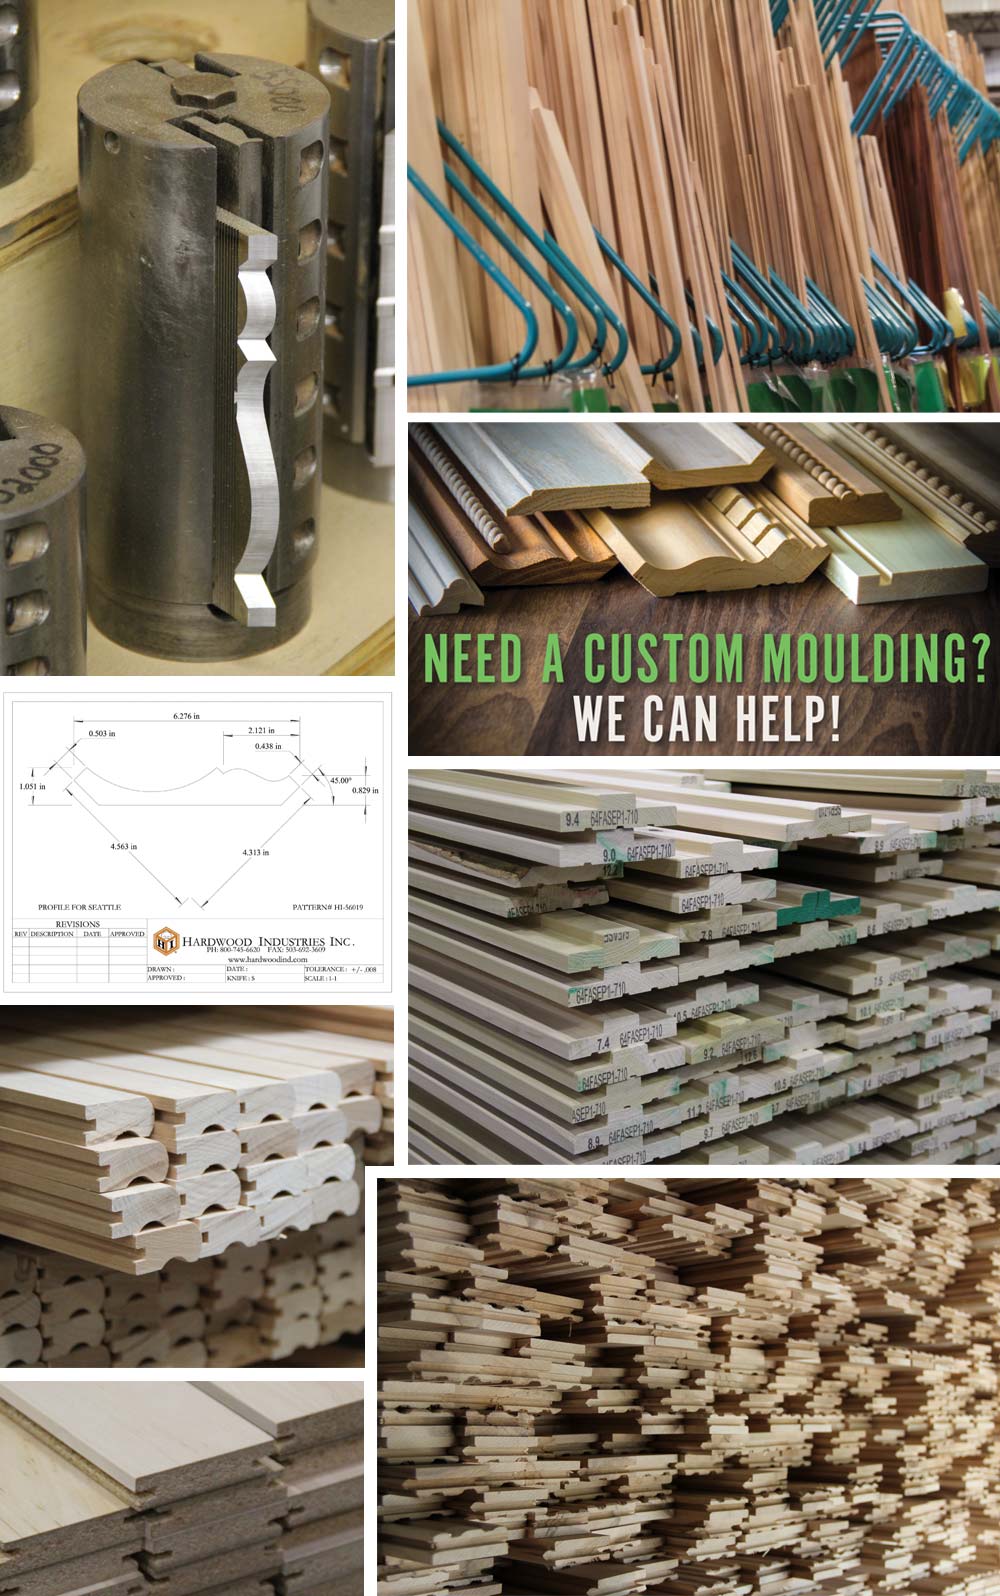 Hardwood Industries, your source for all things moldings!